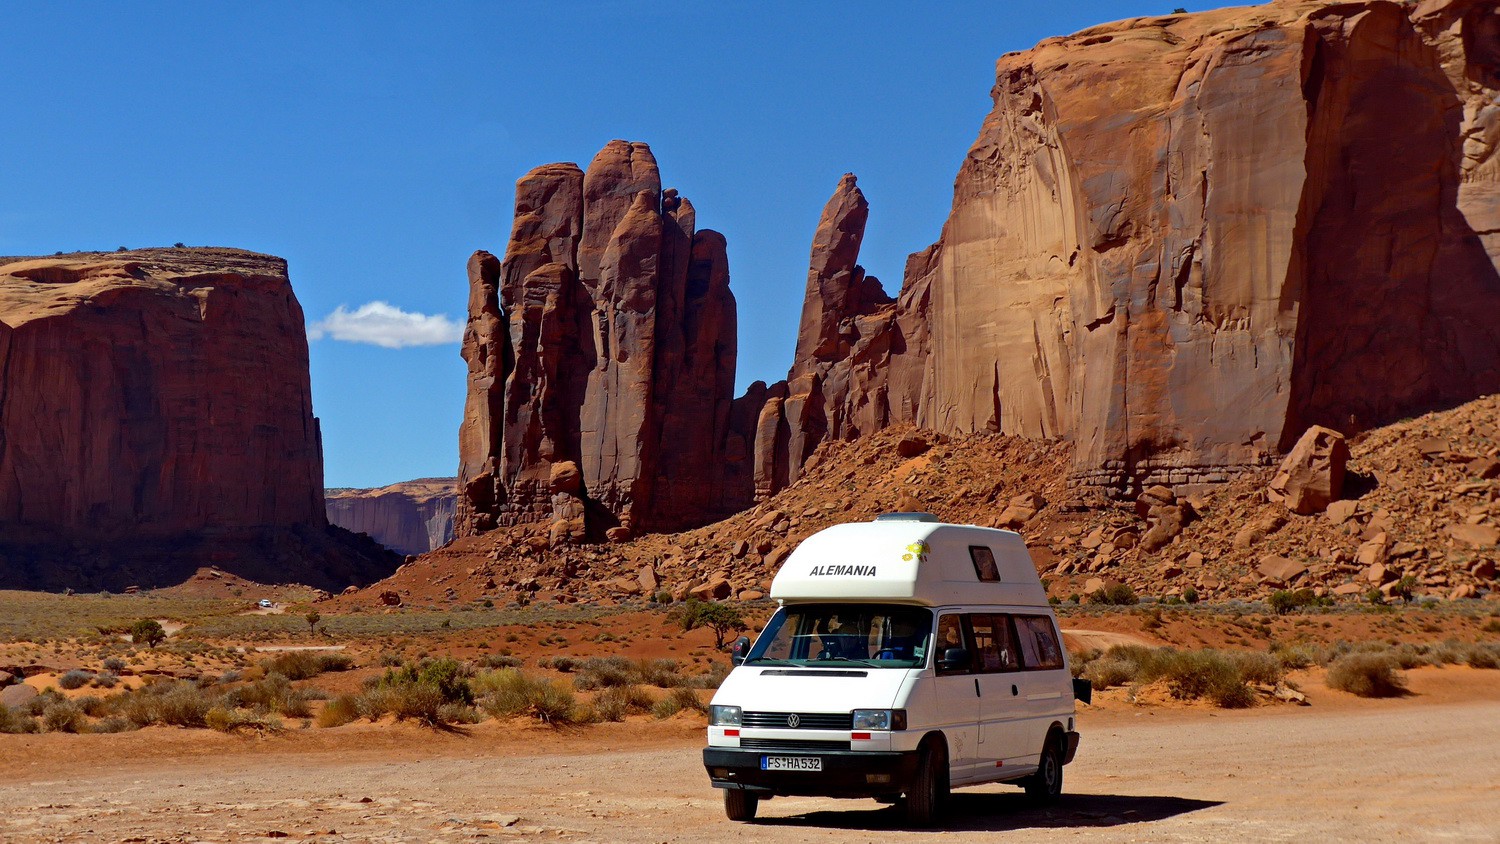 In the Monument Valley